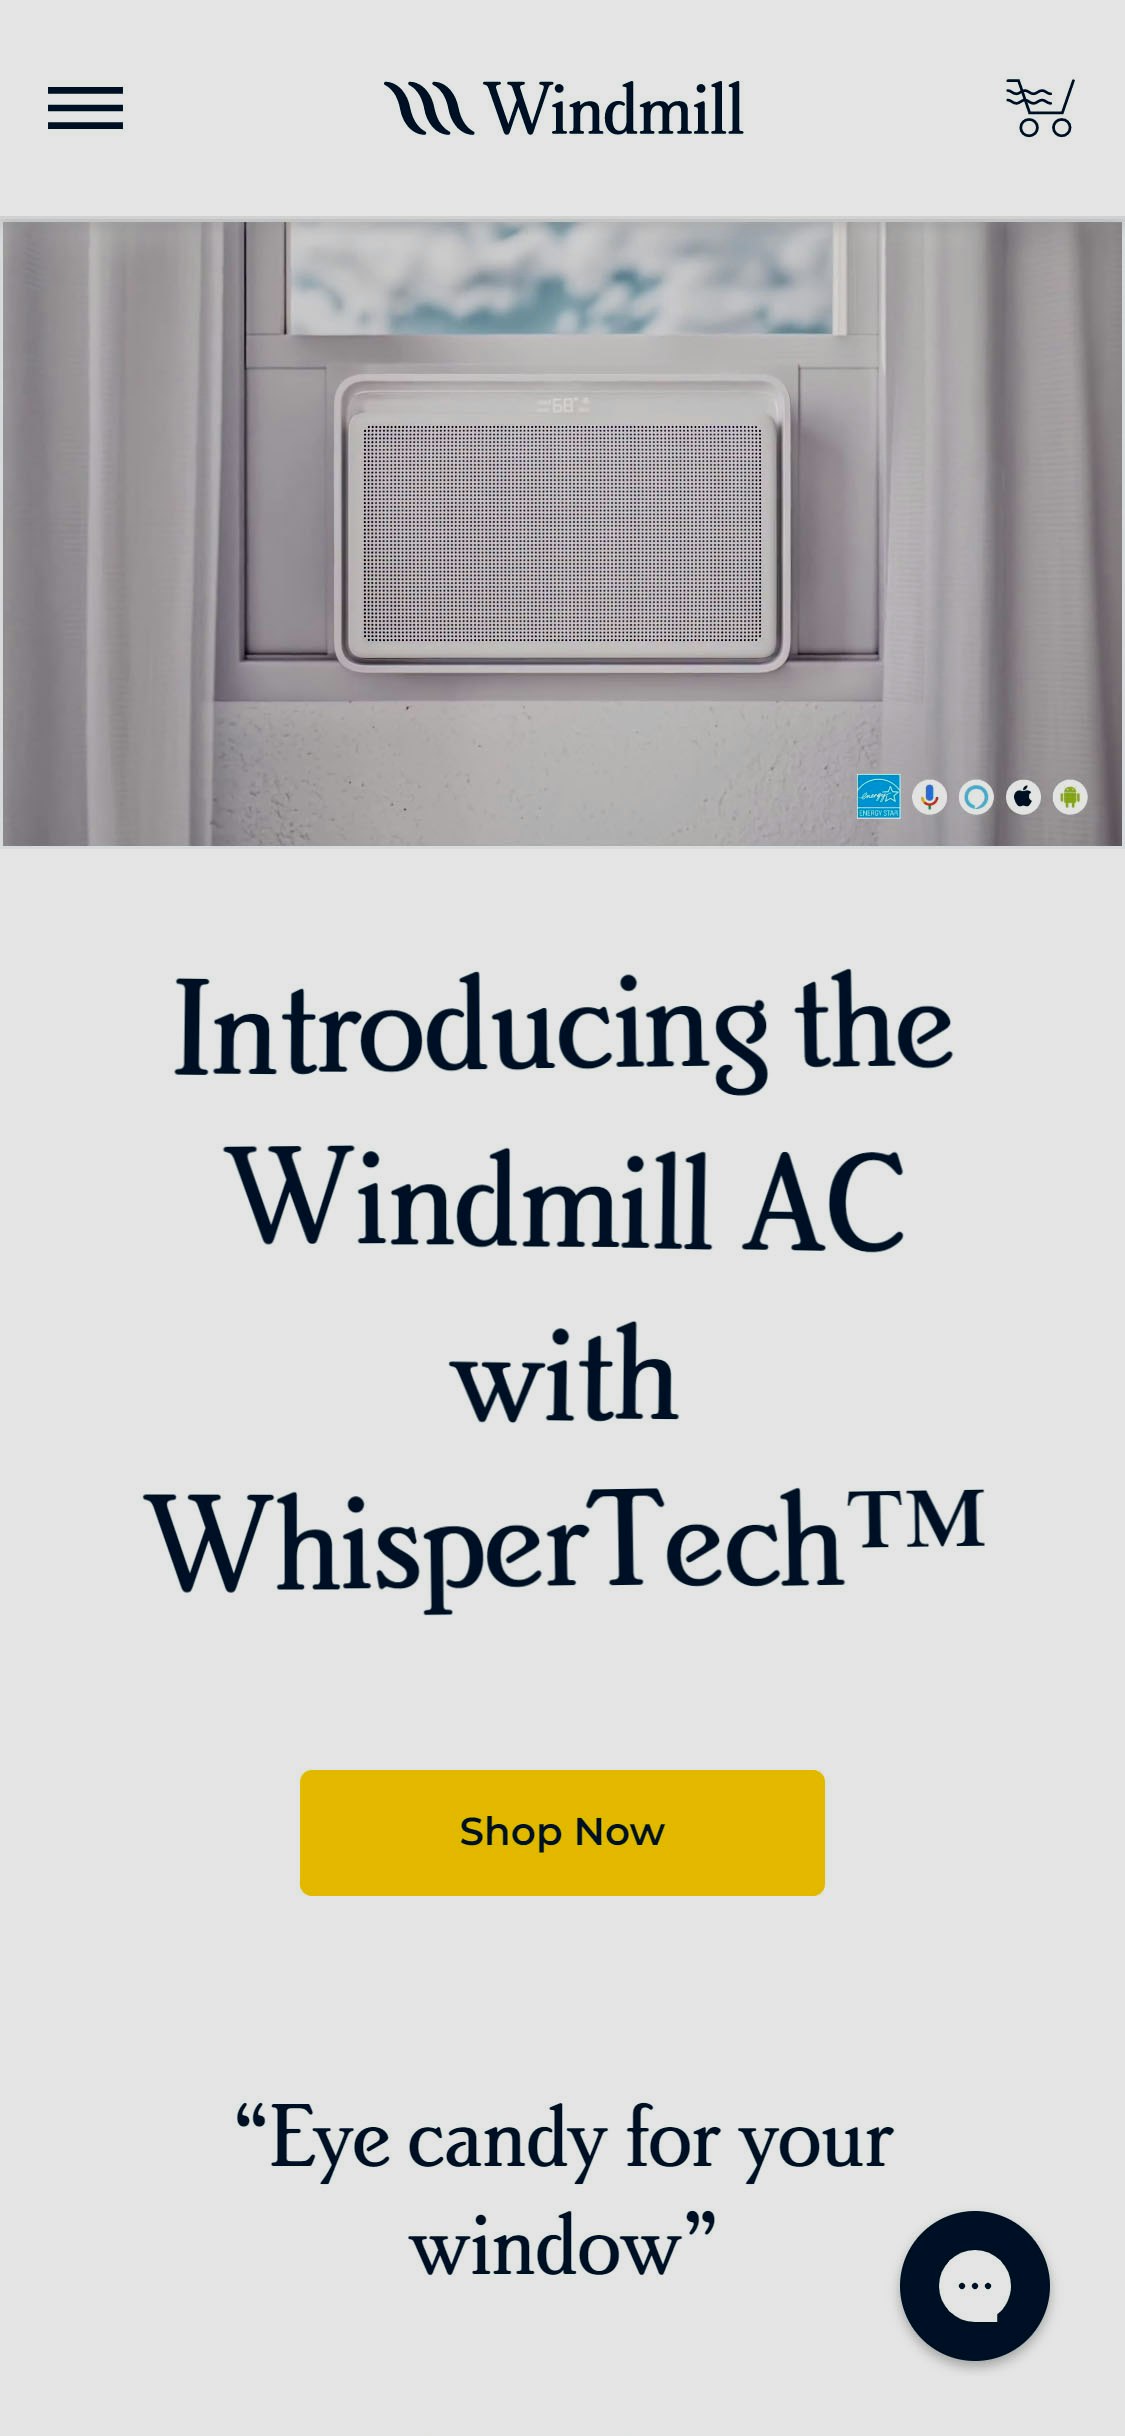 Windmill Air Website (Mobile View)